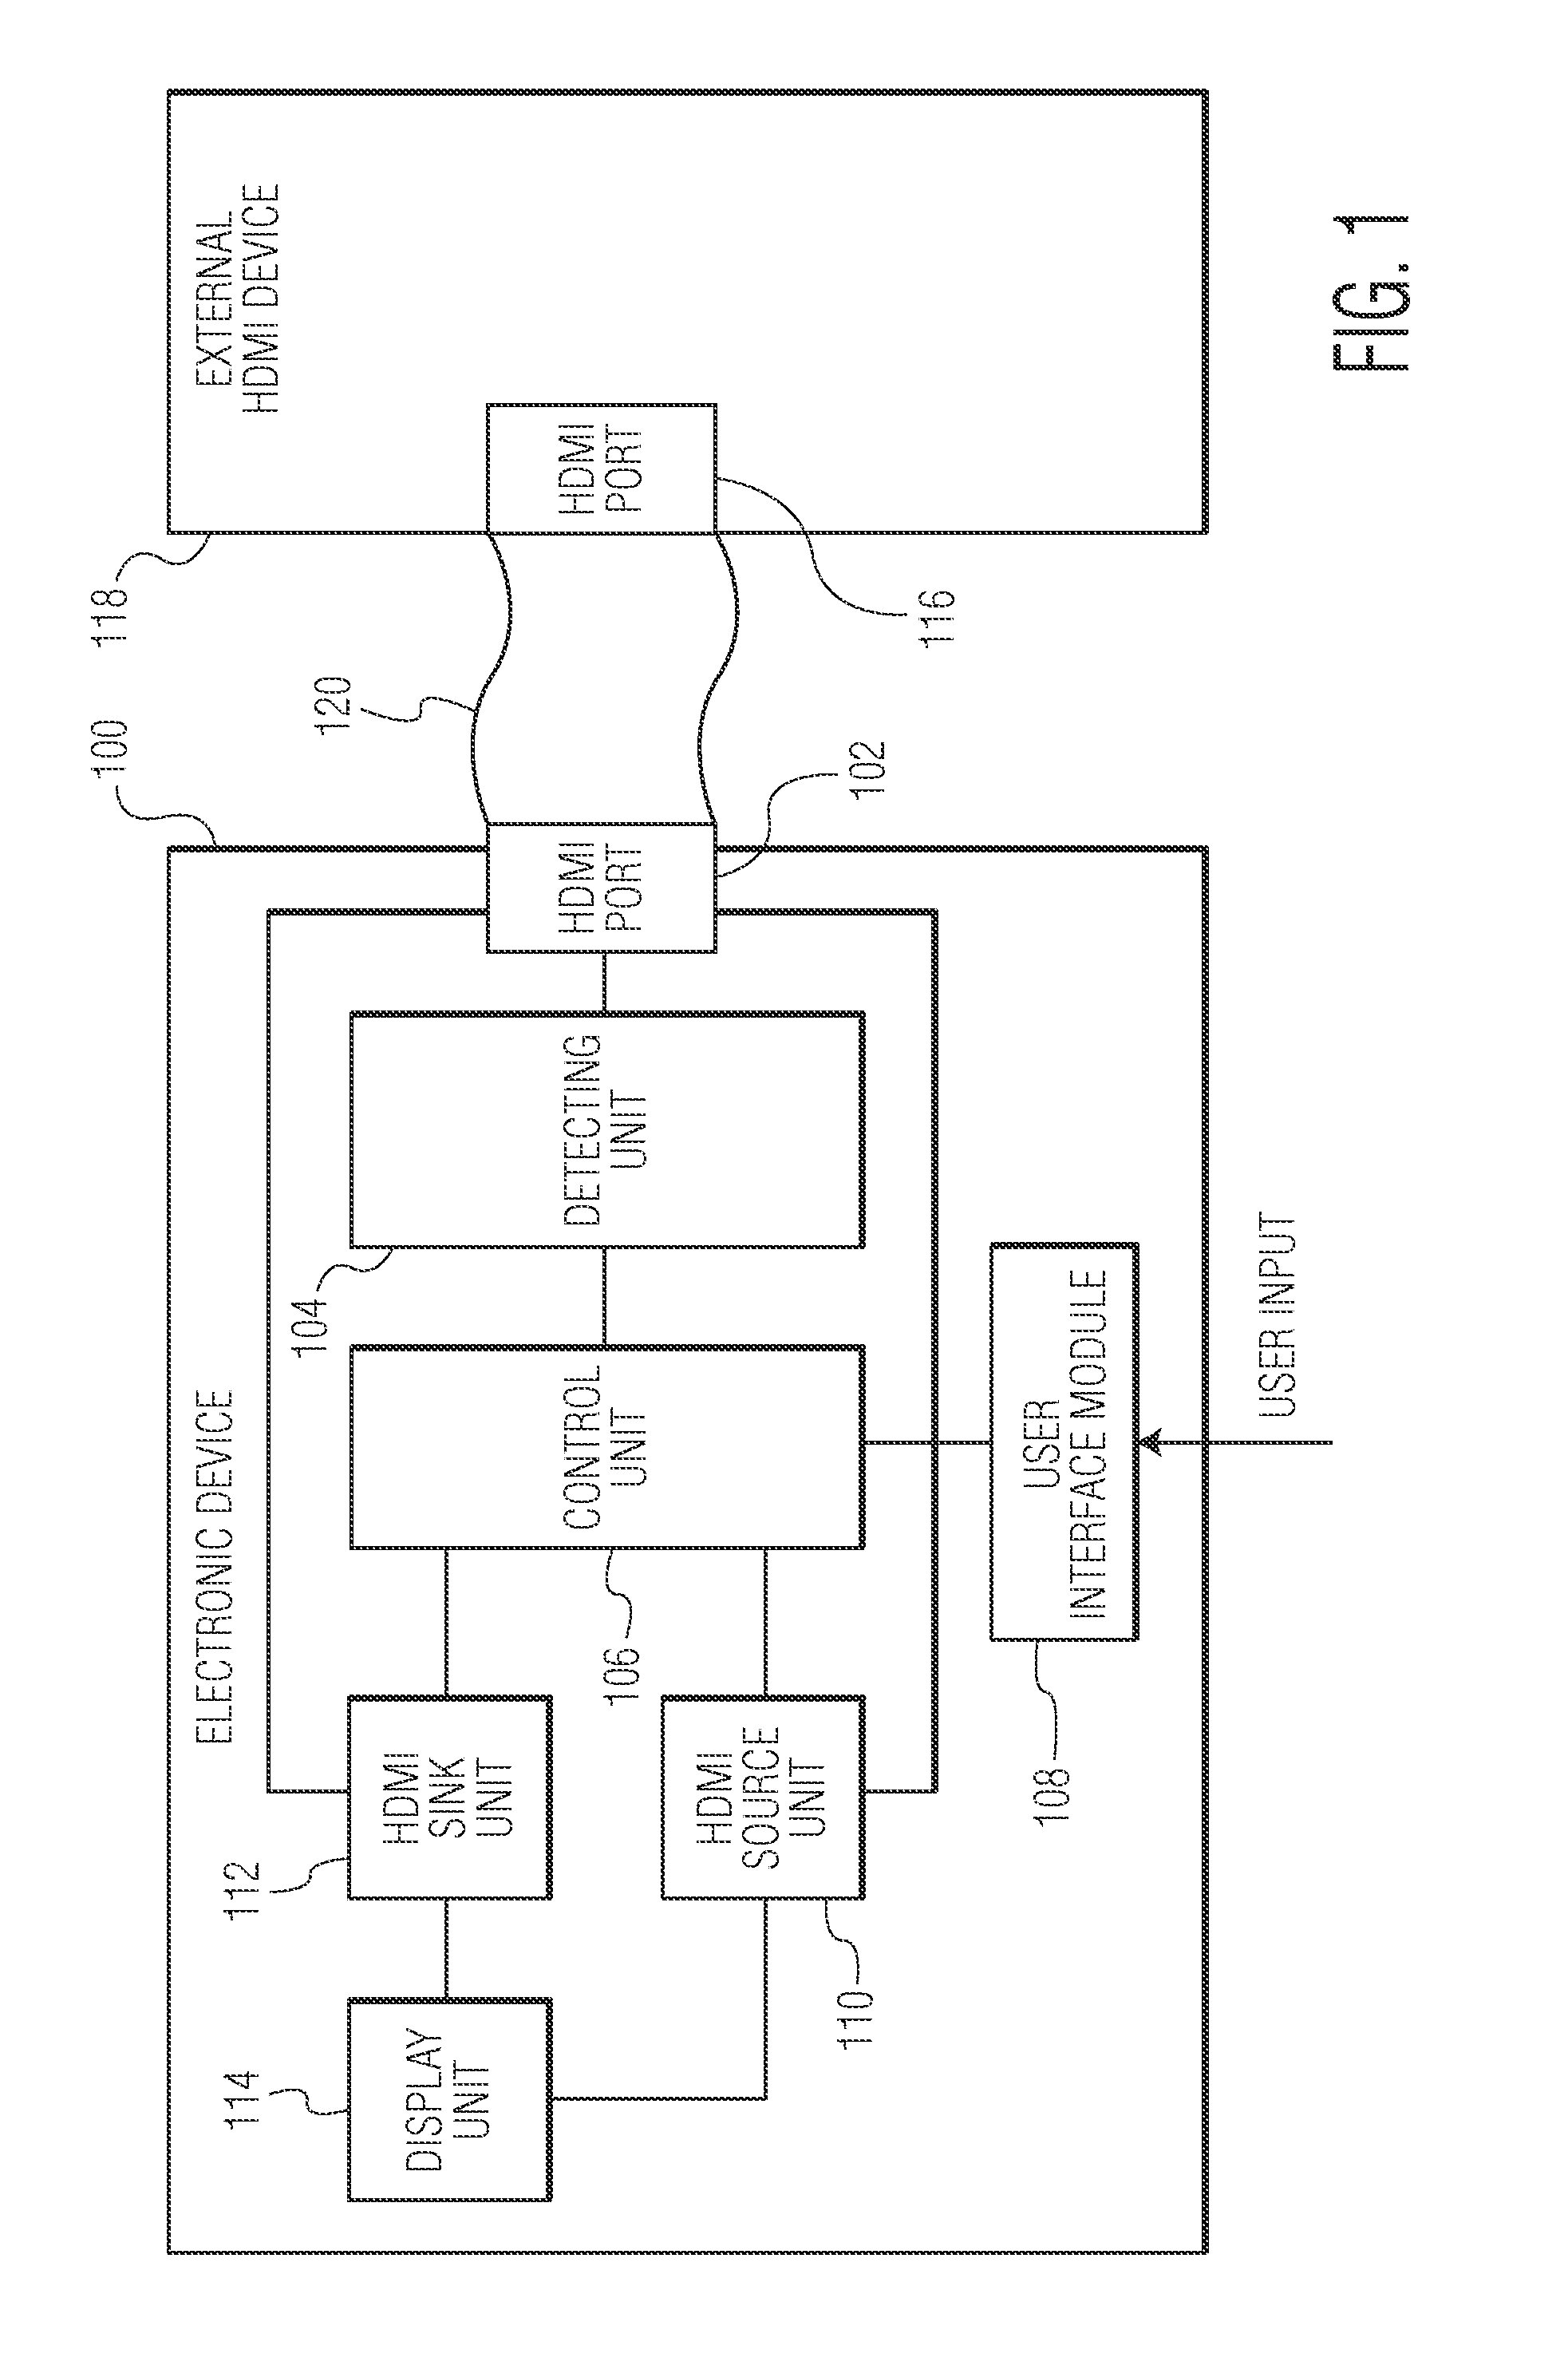 System and method for operating an electronic device having an HDMI port that is shared between HDMI source function and an HDMI sink function of the electronic device